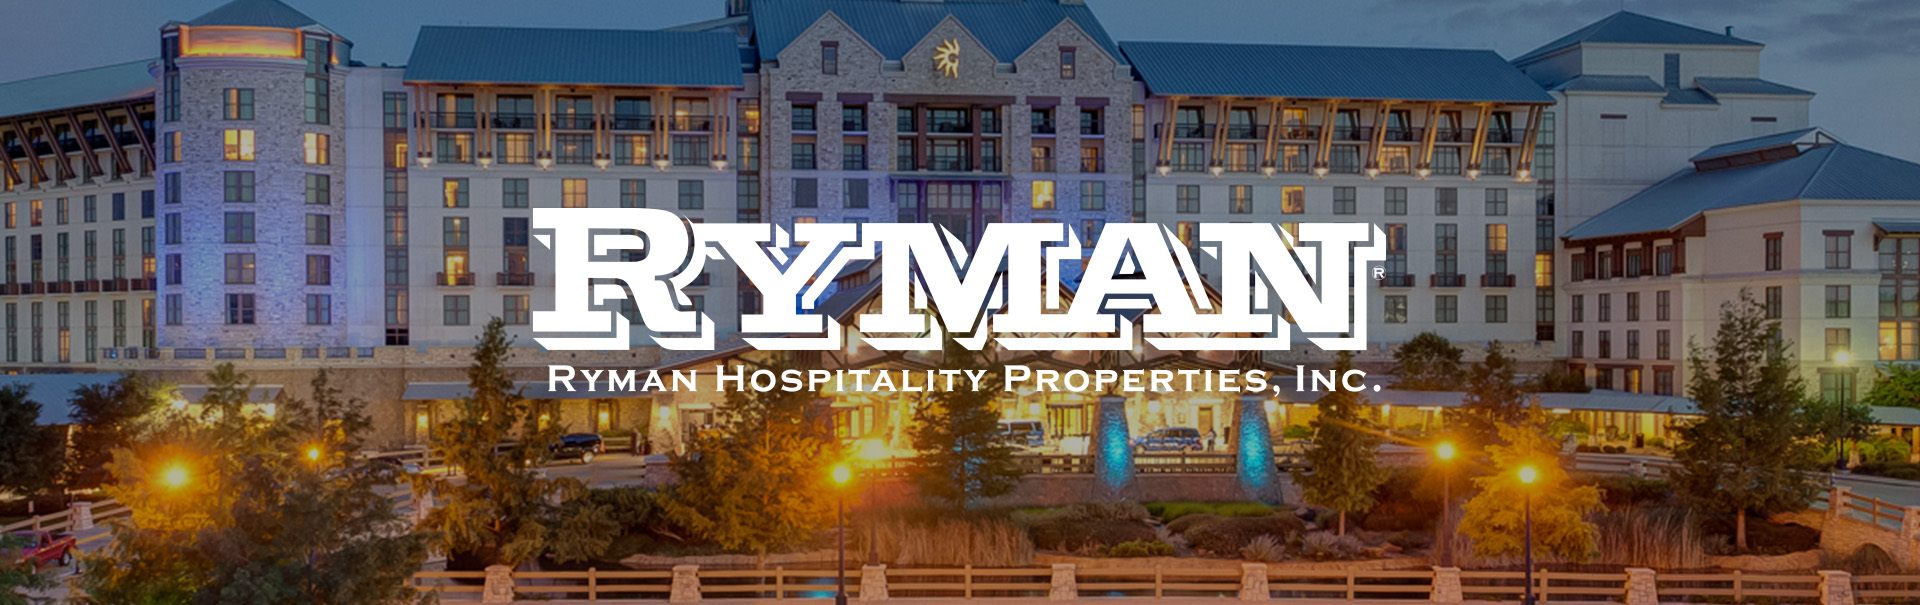 Ryman Hospitality Properties, Inc. (RHP) Sees Significant Insider Investment